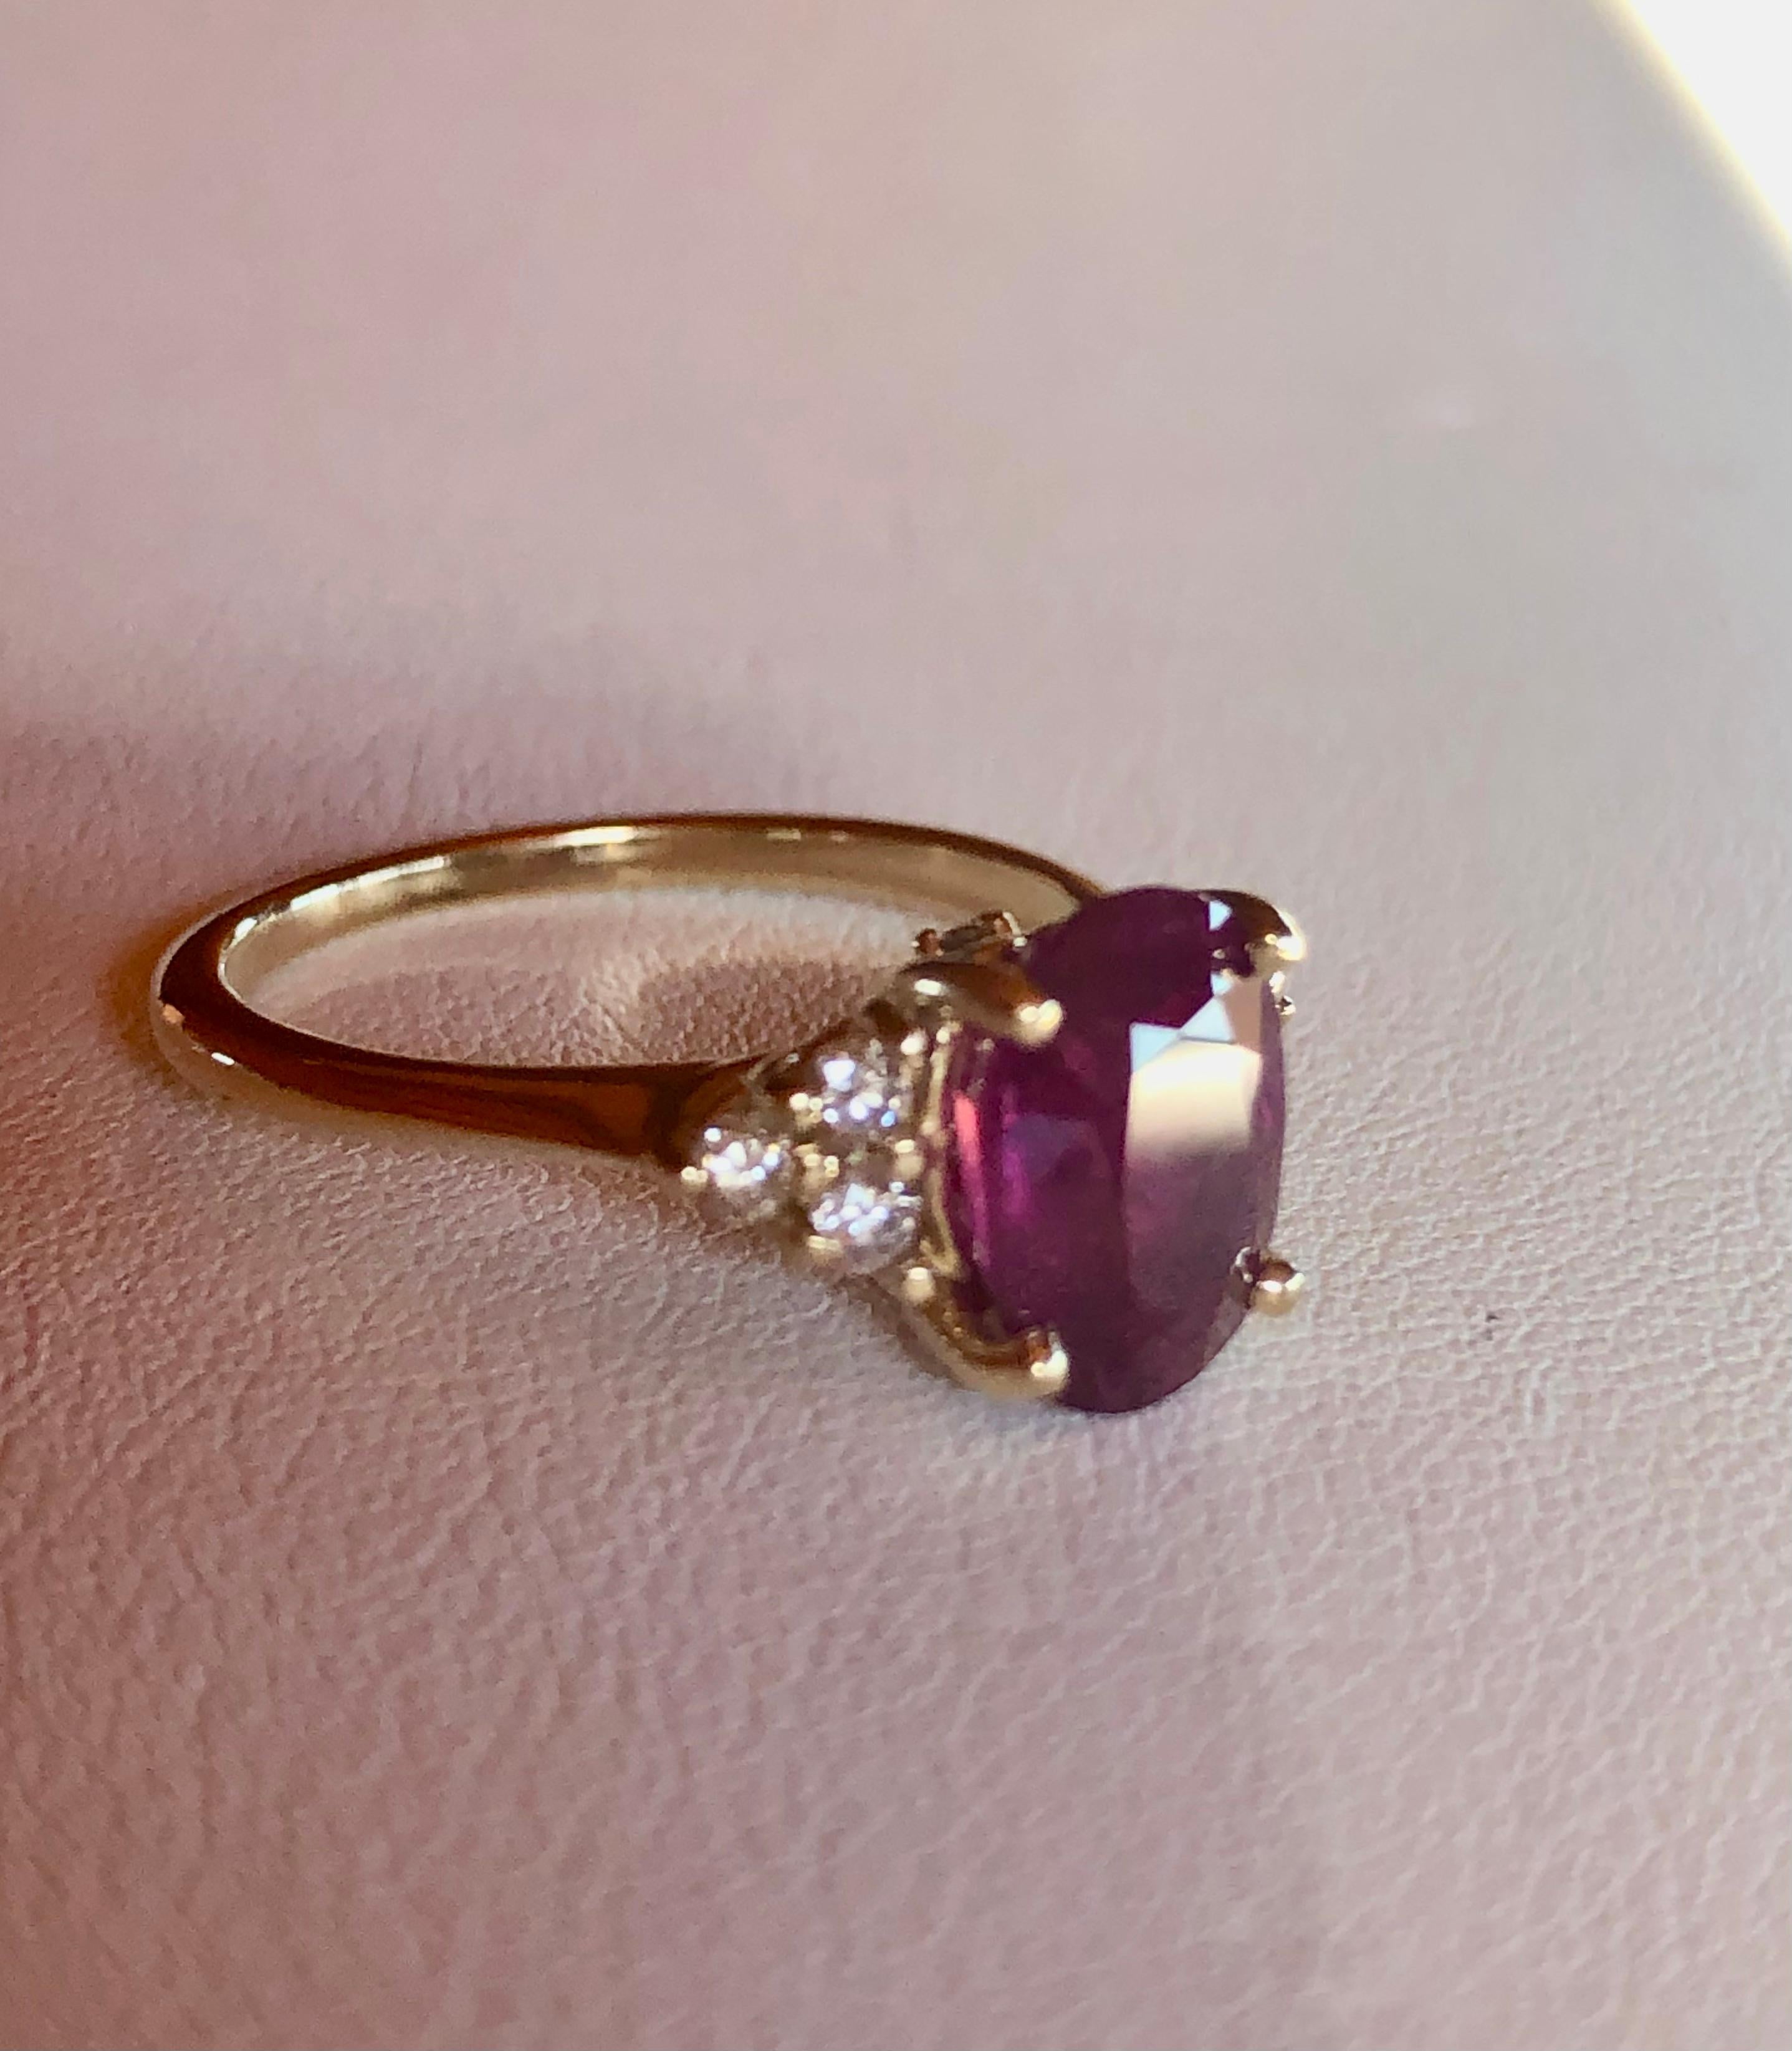 A classic cocktail ruby and diamond ring 14 karat yellow gold. This beautiful estate ring features a 3.0 carat ruby (Treated, heated, and filled)  at the center that is flanked by six round brilliant cut diamonds H/SI  weighing approximately .30